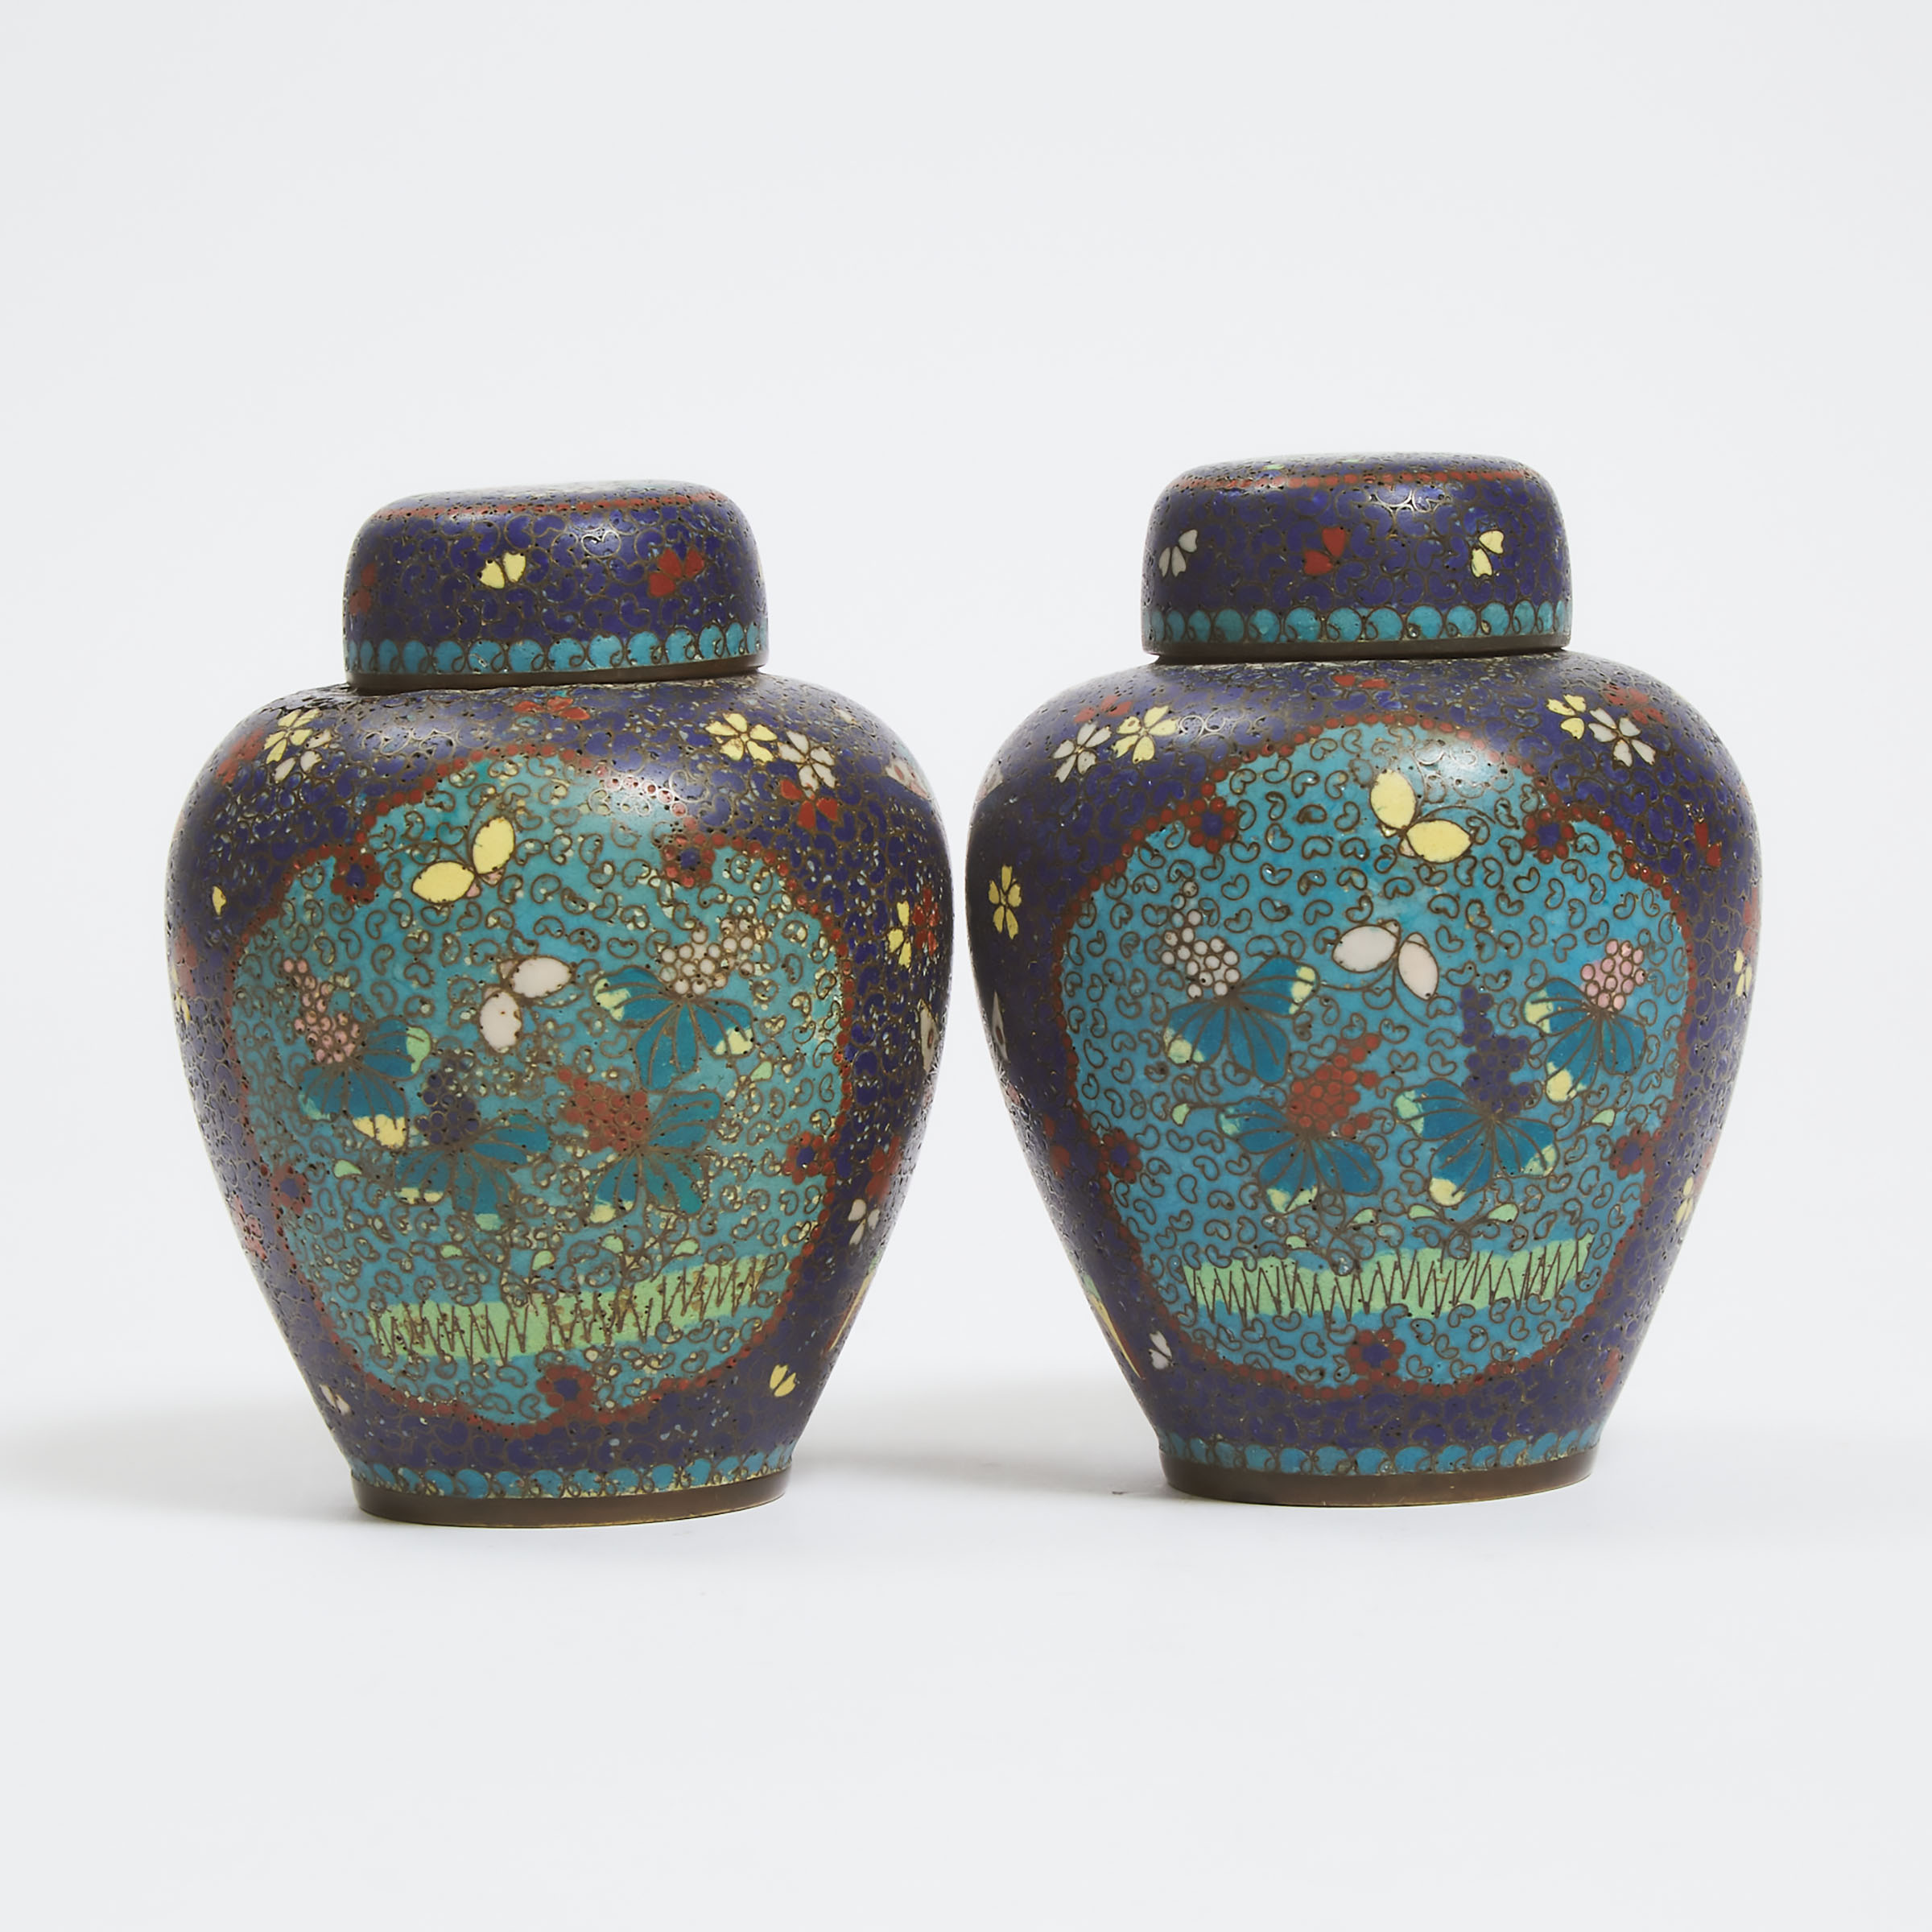 A Pair of Chinese Cloisonné Lidded Jars, Late Qing Dynasty, 19th Century